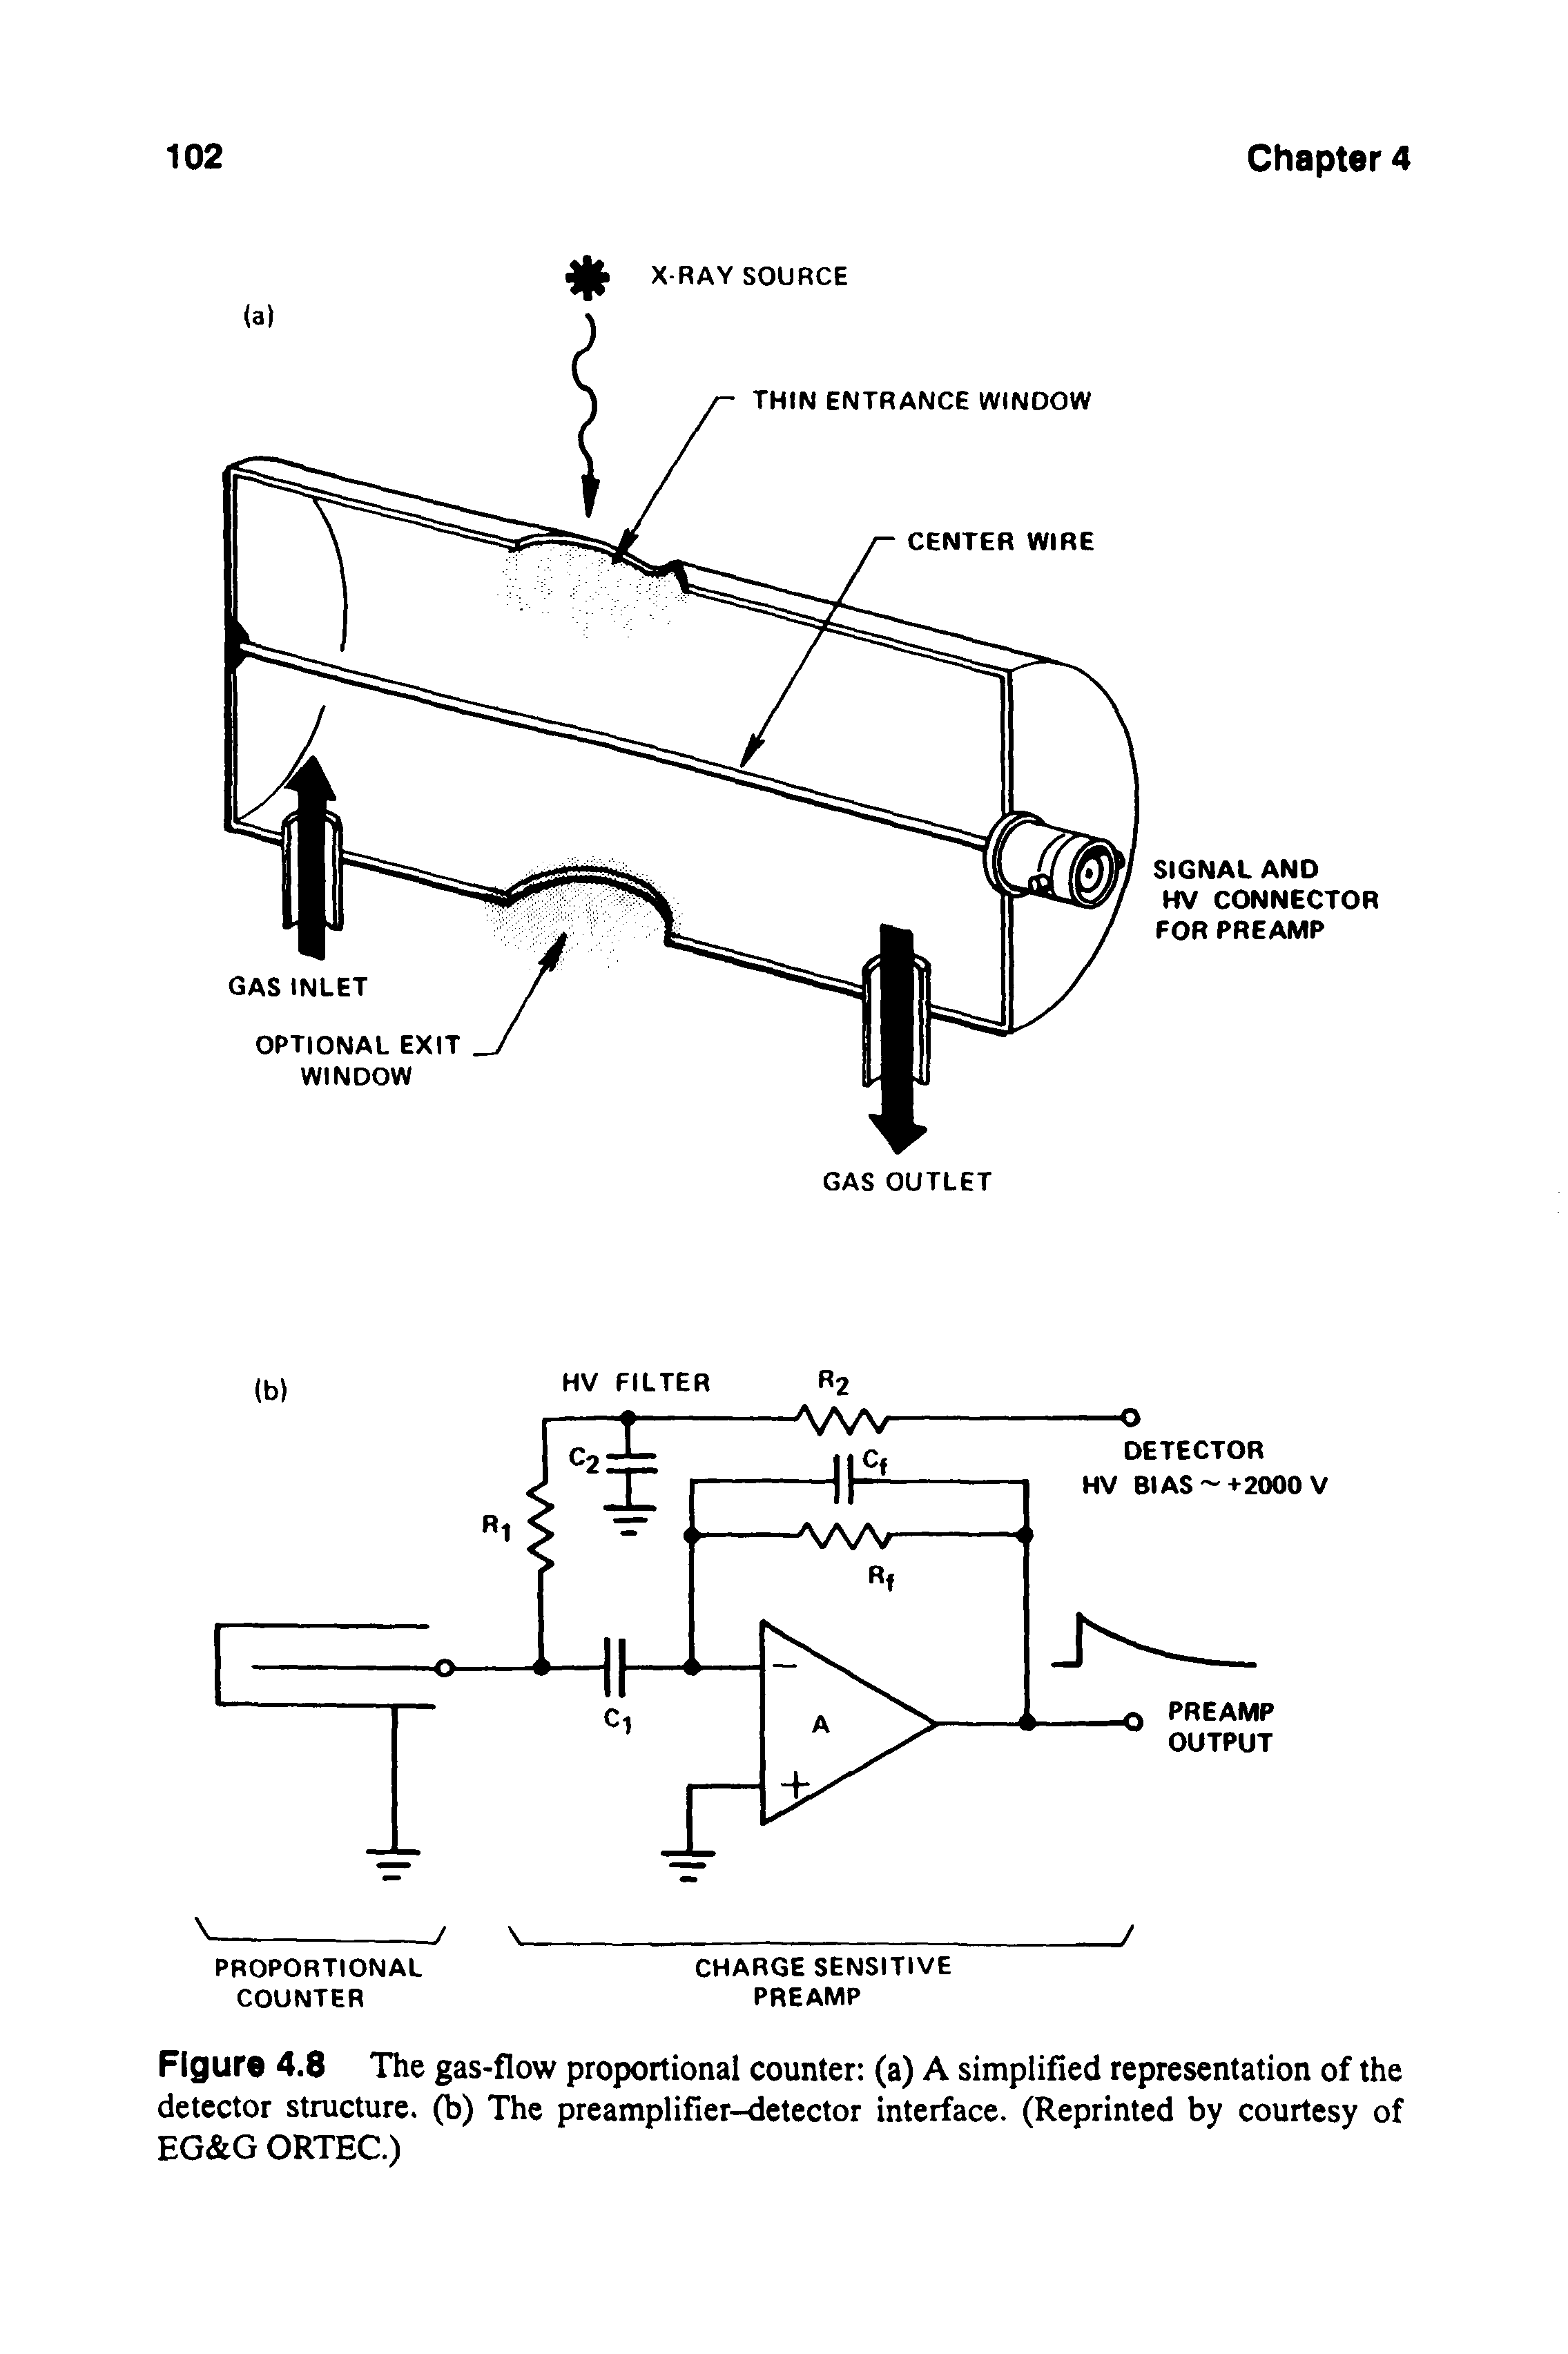 Figure 4.8 The gas-flow proportional counter (a) A simplified representation of the detector structure, (b) The preamplifier-detector interface. (Reprinted by courtesy of EG G ORTEC.)...